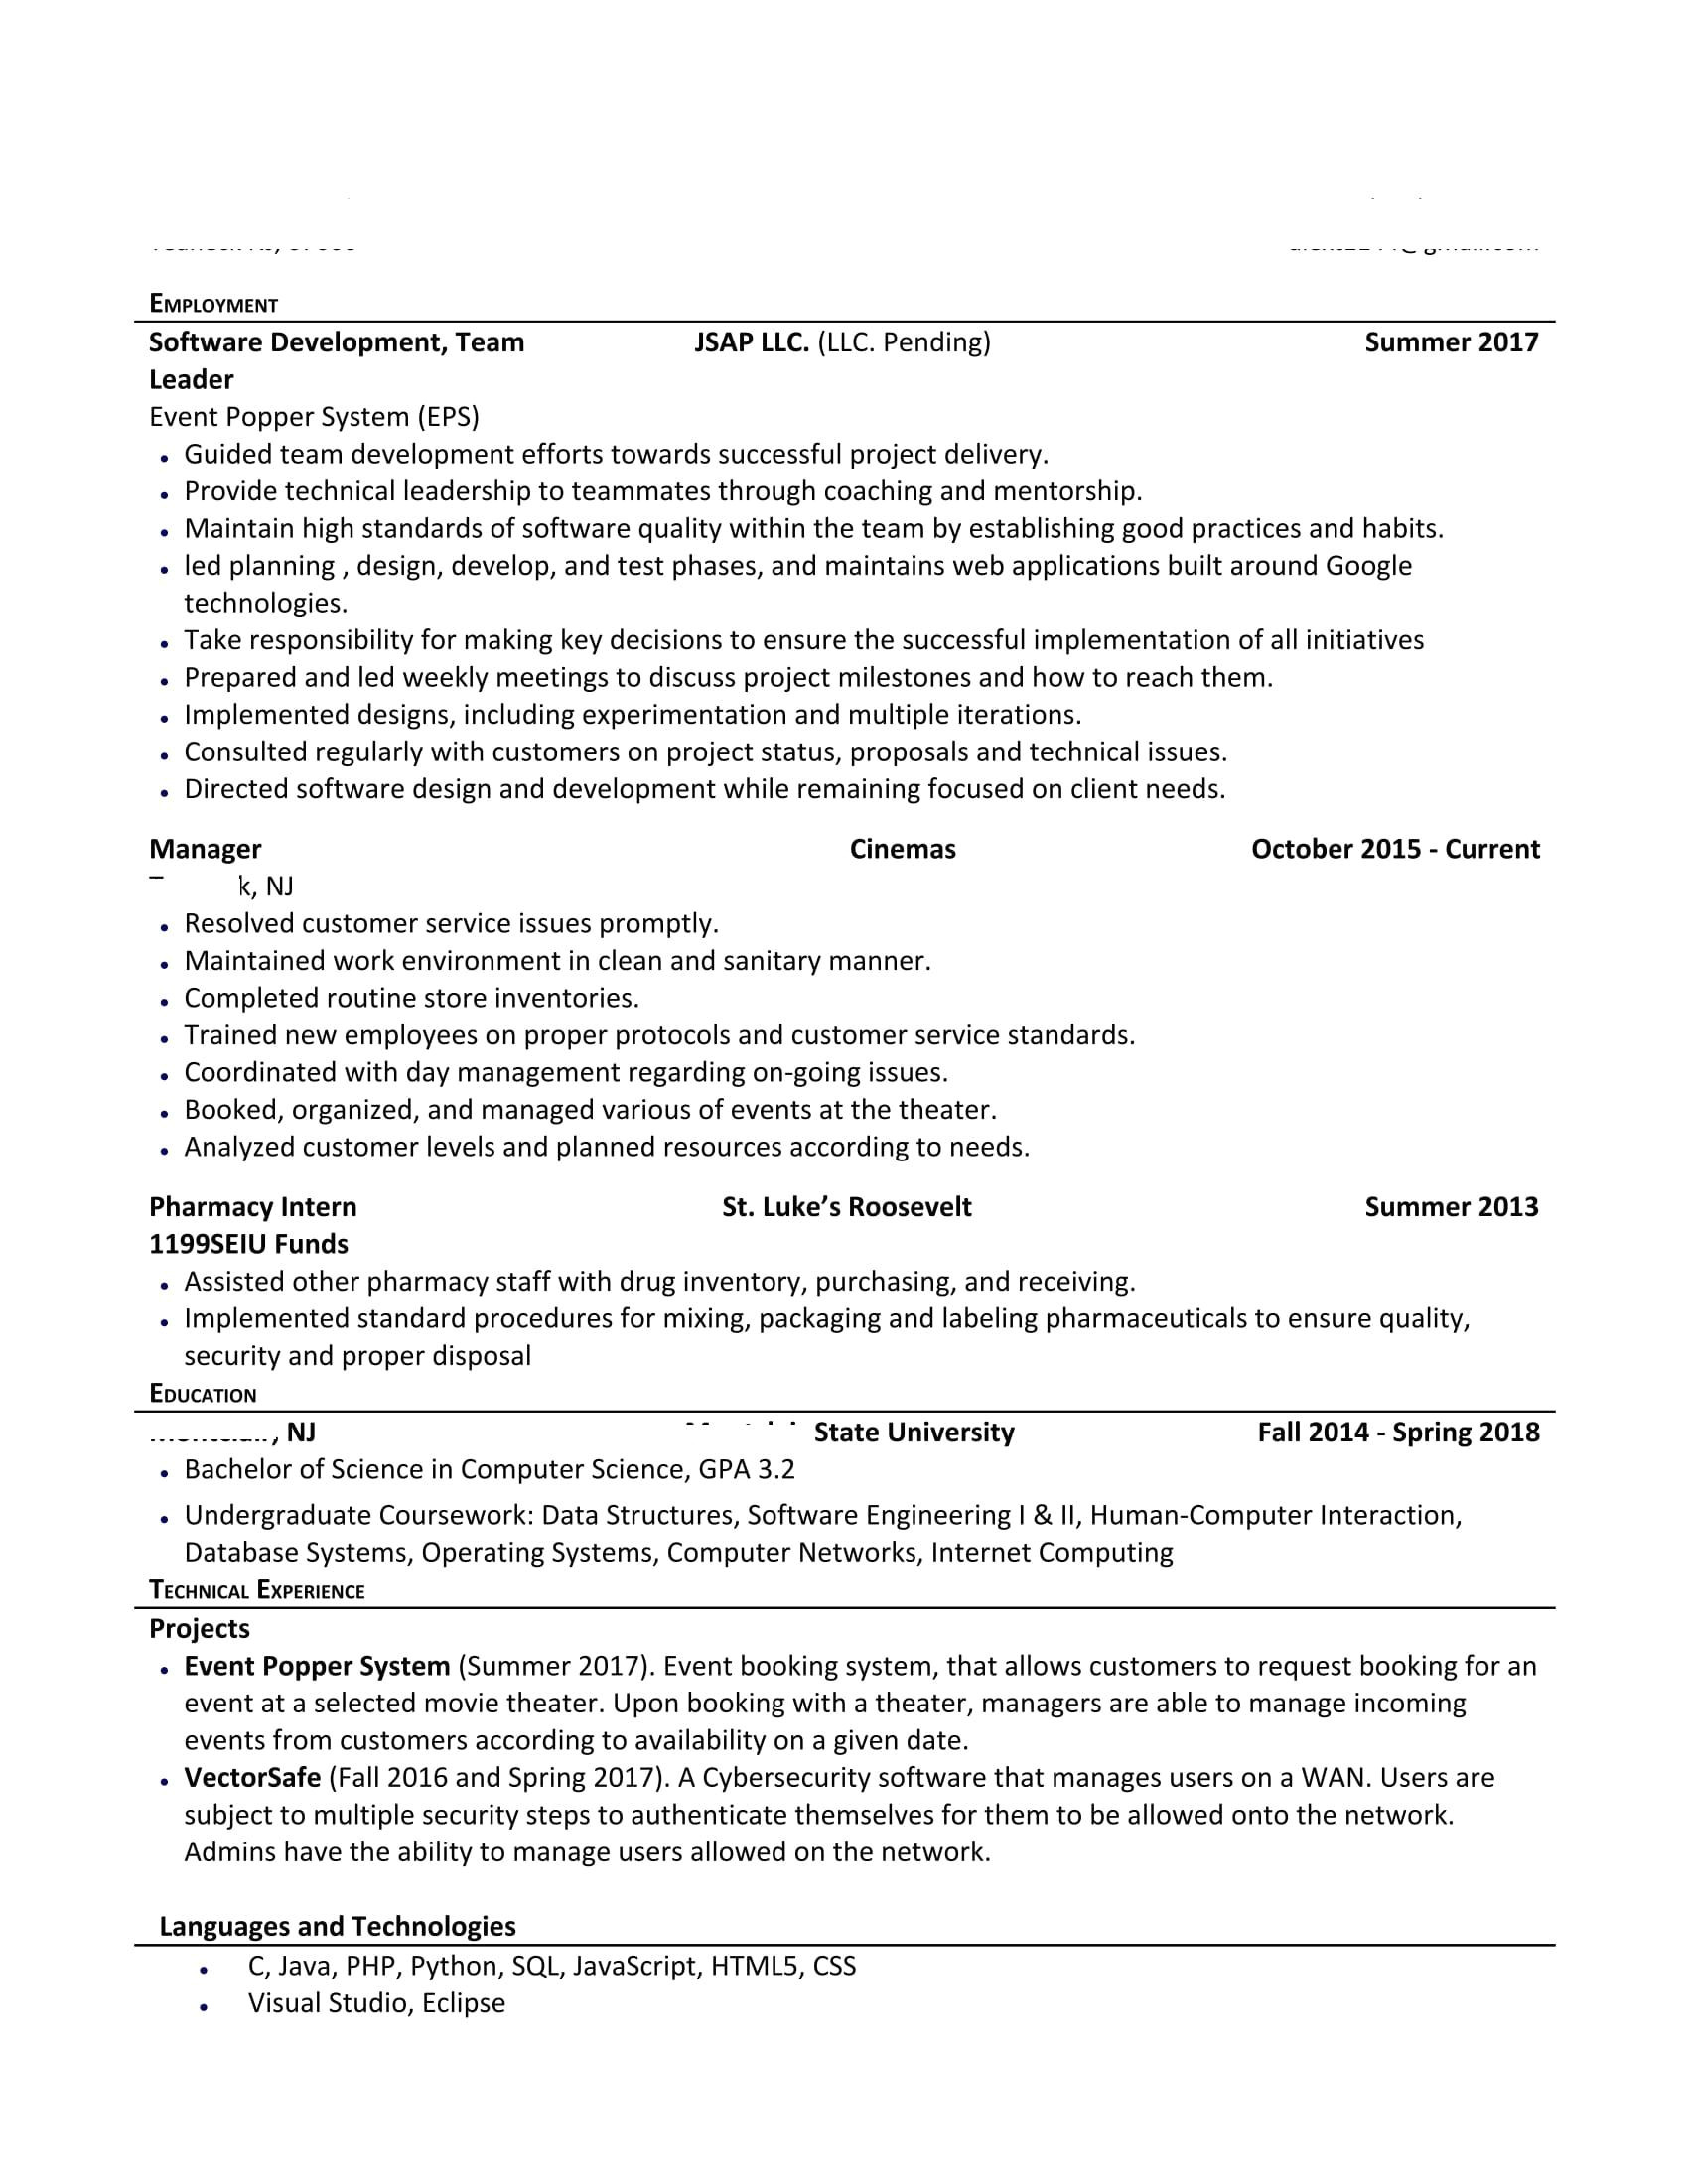 college senior needs help resume reviewed for